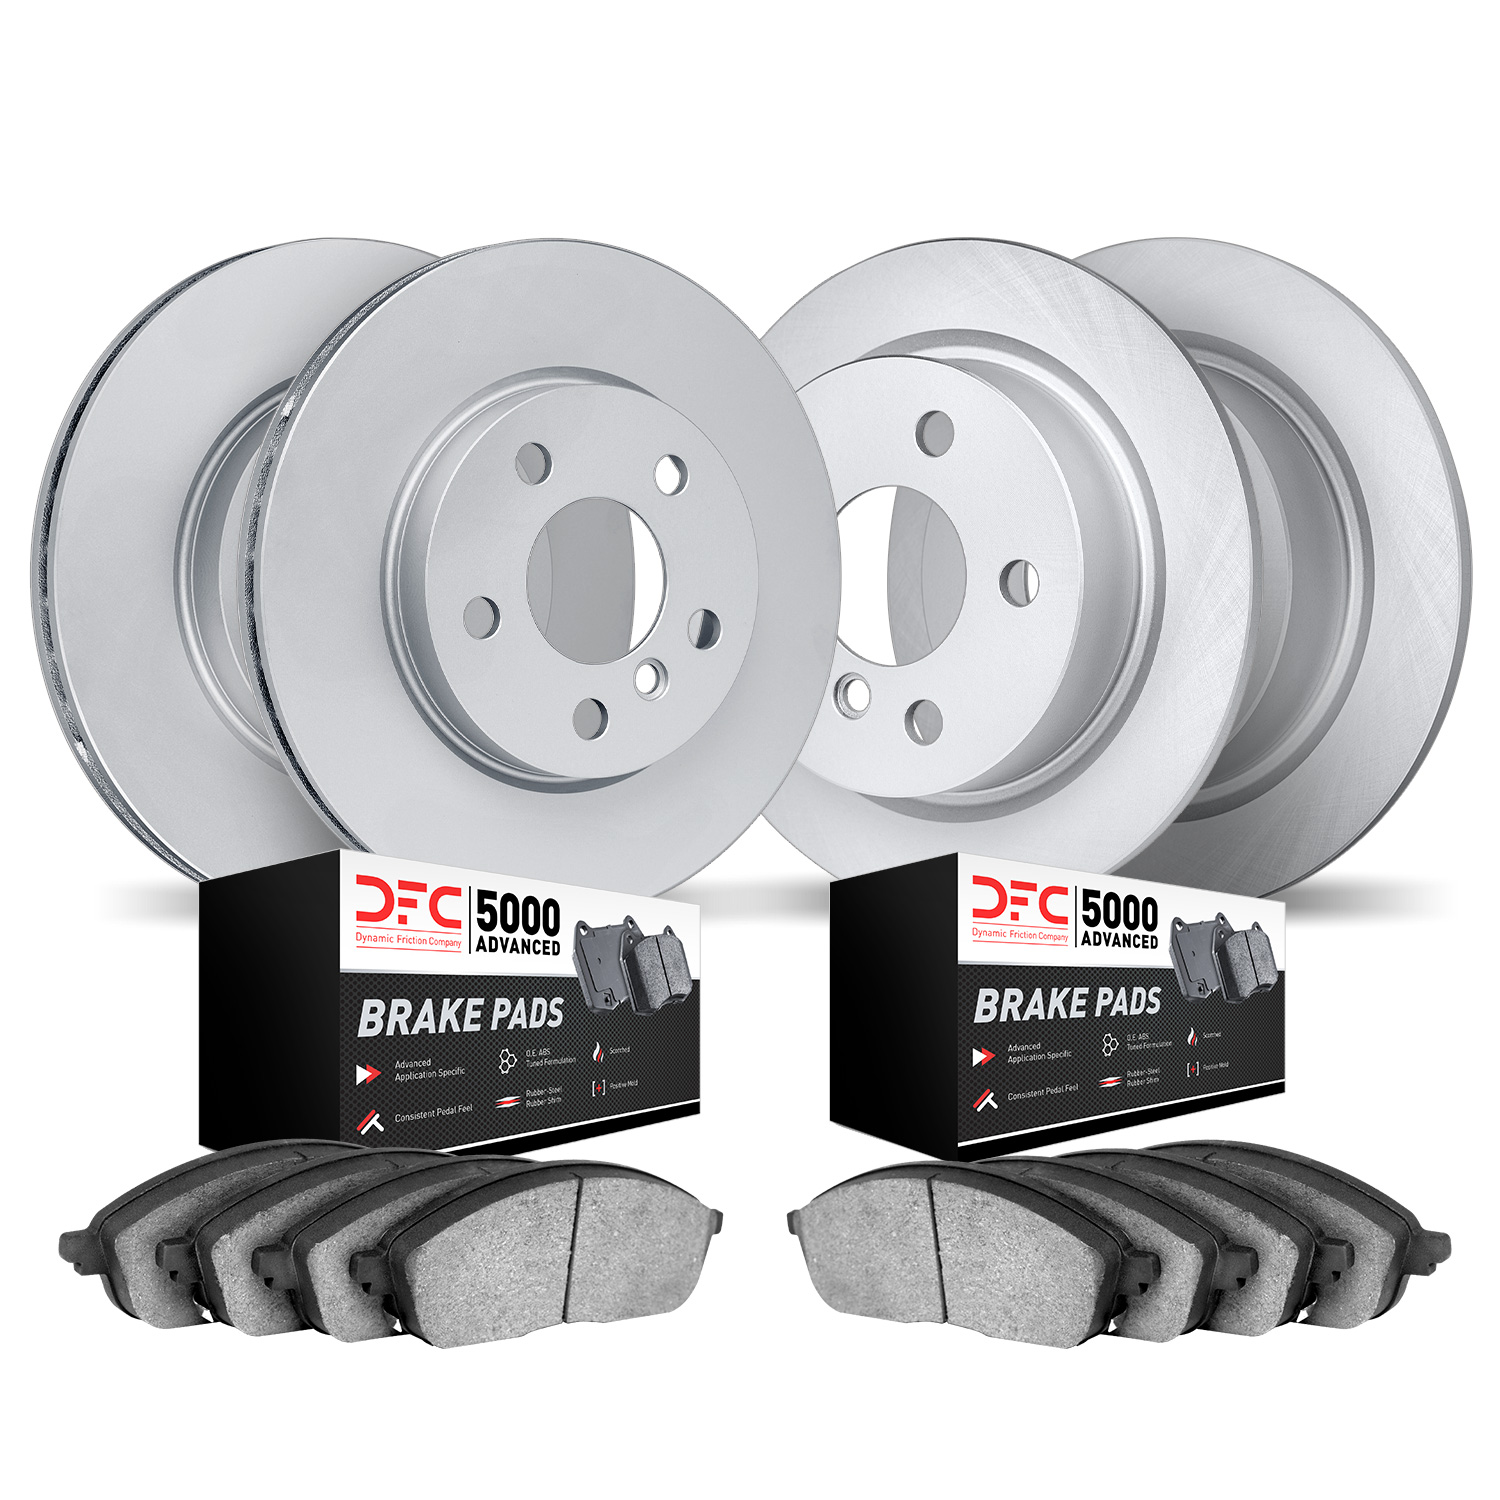 9504-54096 GEOMET Brake Rotors w/5000 Advanced Brake Pads Kit, Fits Select Ford/Lincoln/Mercury/Mazda, Position: Front and Rear